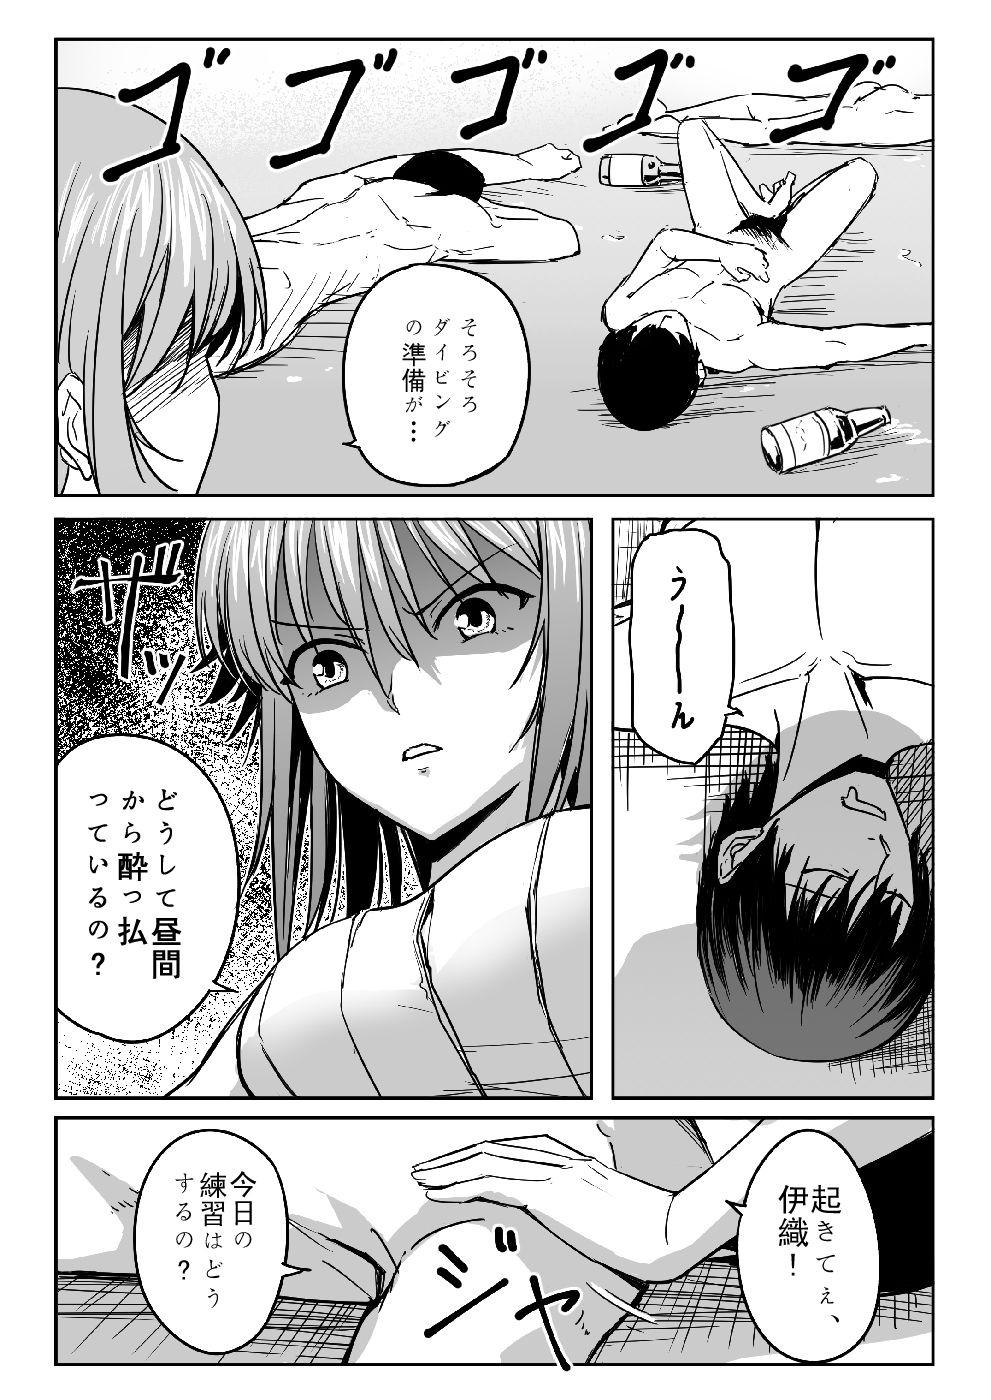 Blond Chika-chan is a goodbye! - Grand blue Stepsister - Page 6